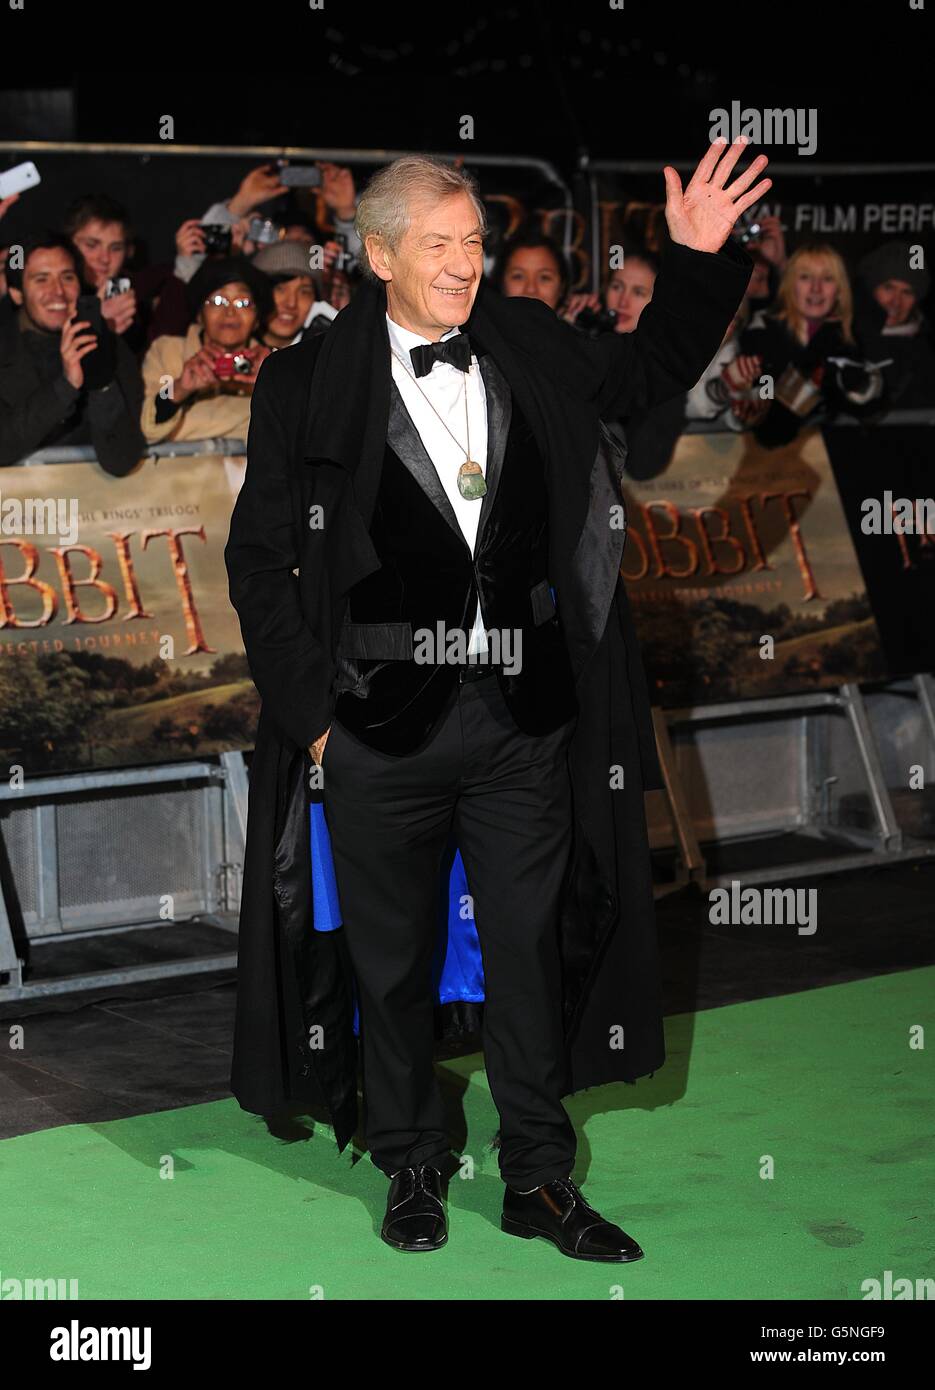 Sir Ian McKellen arriving for the UK Premiere of The Hobbit: An Unexpected Journey at the Odeon Leicester Square, London. Stock Photo